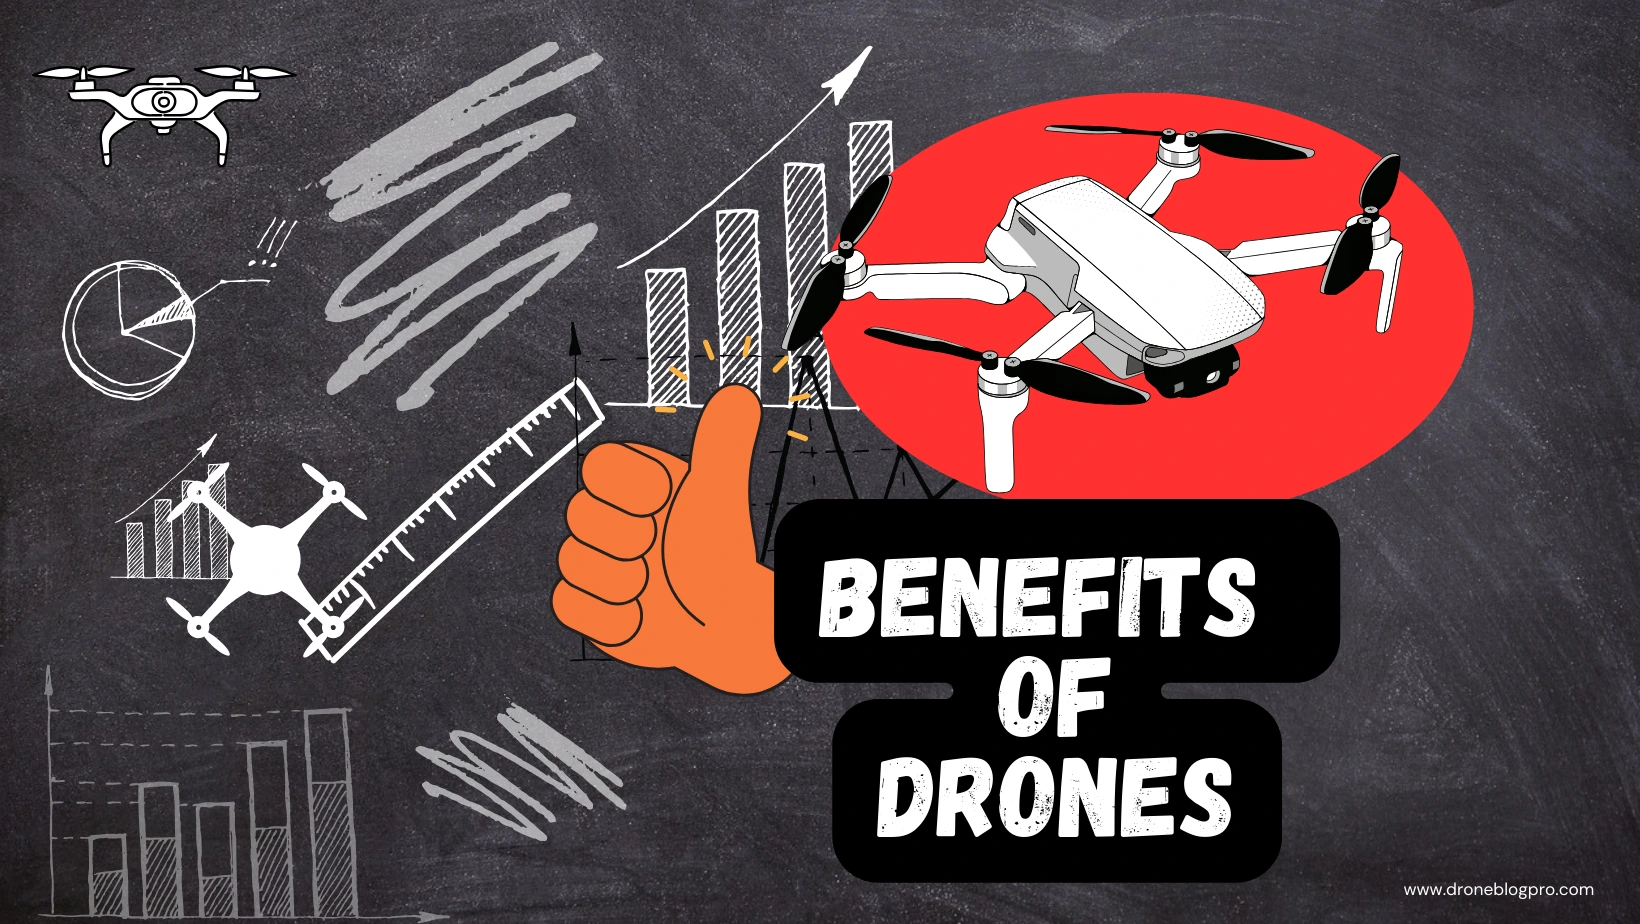 Drones-in-the-Sky-at-Night-Benefits-of-Drones